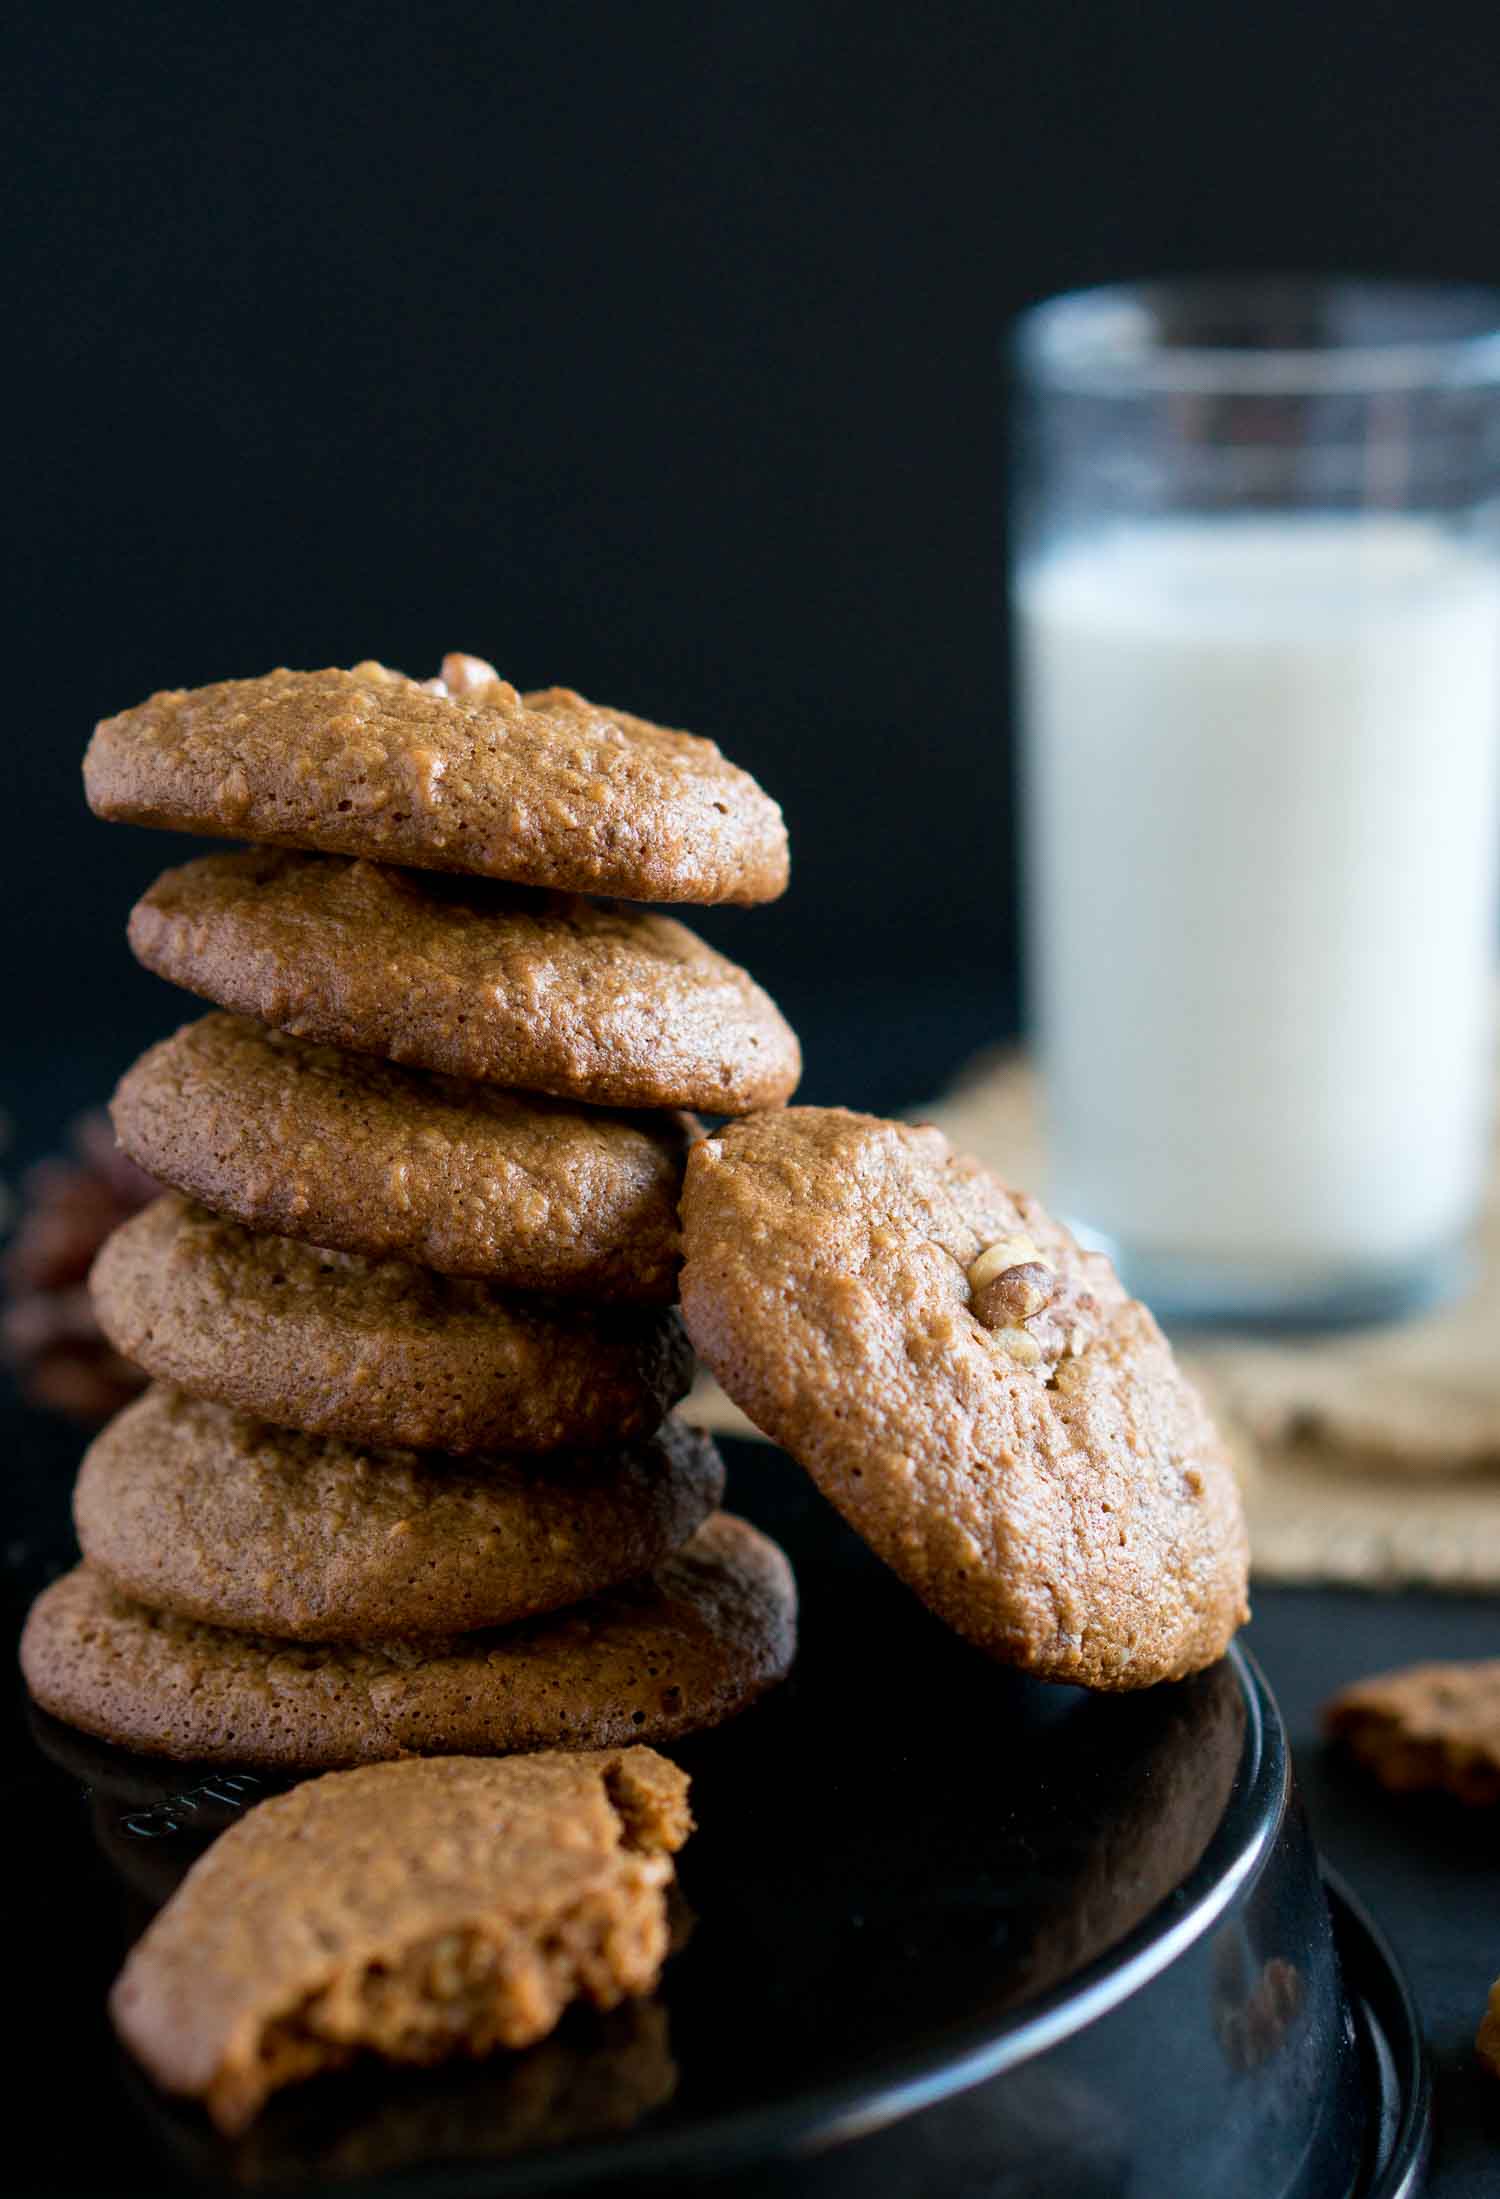 A close up of walnut cookies and milk in the background